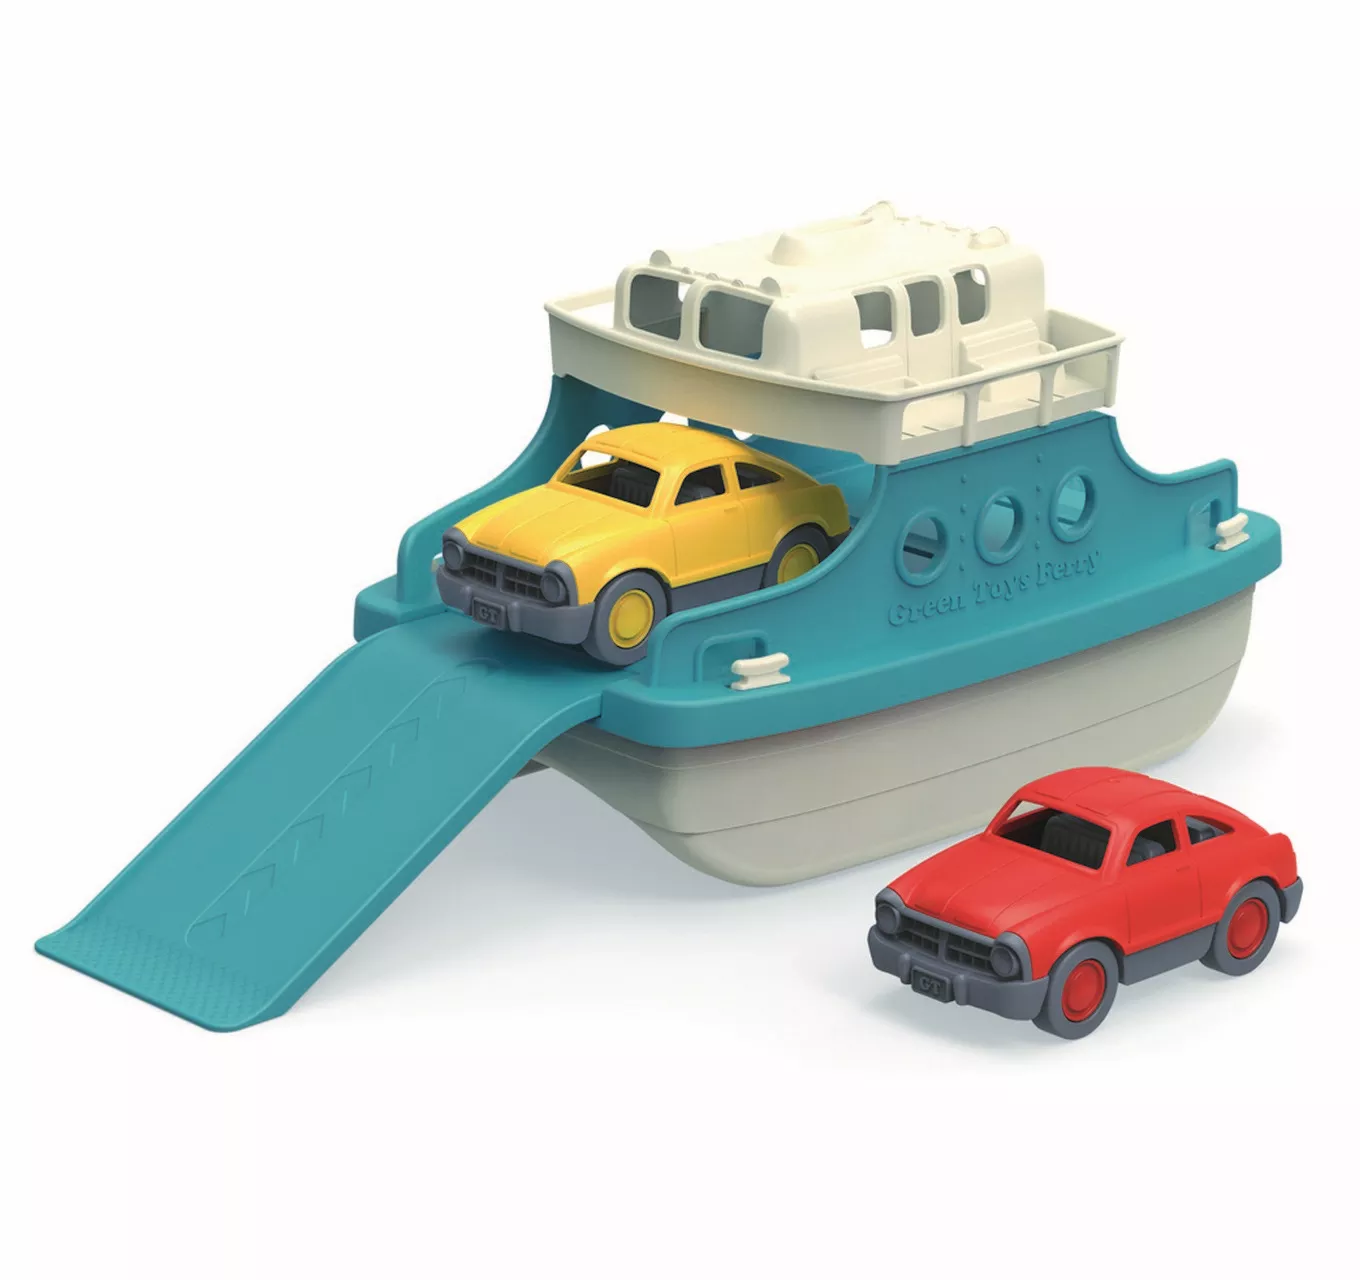 Ferry Boat with Cars